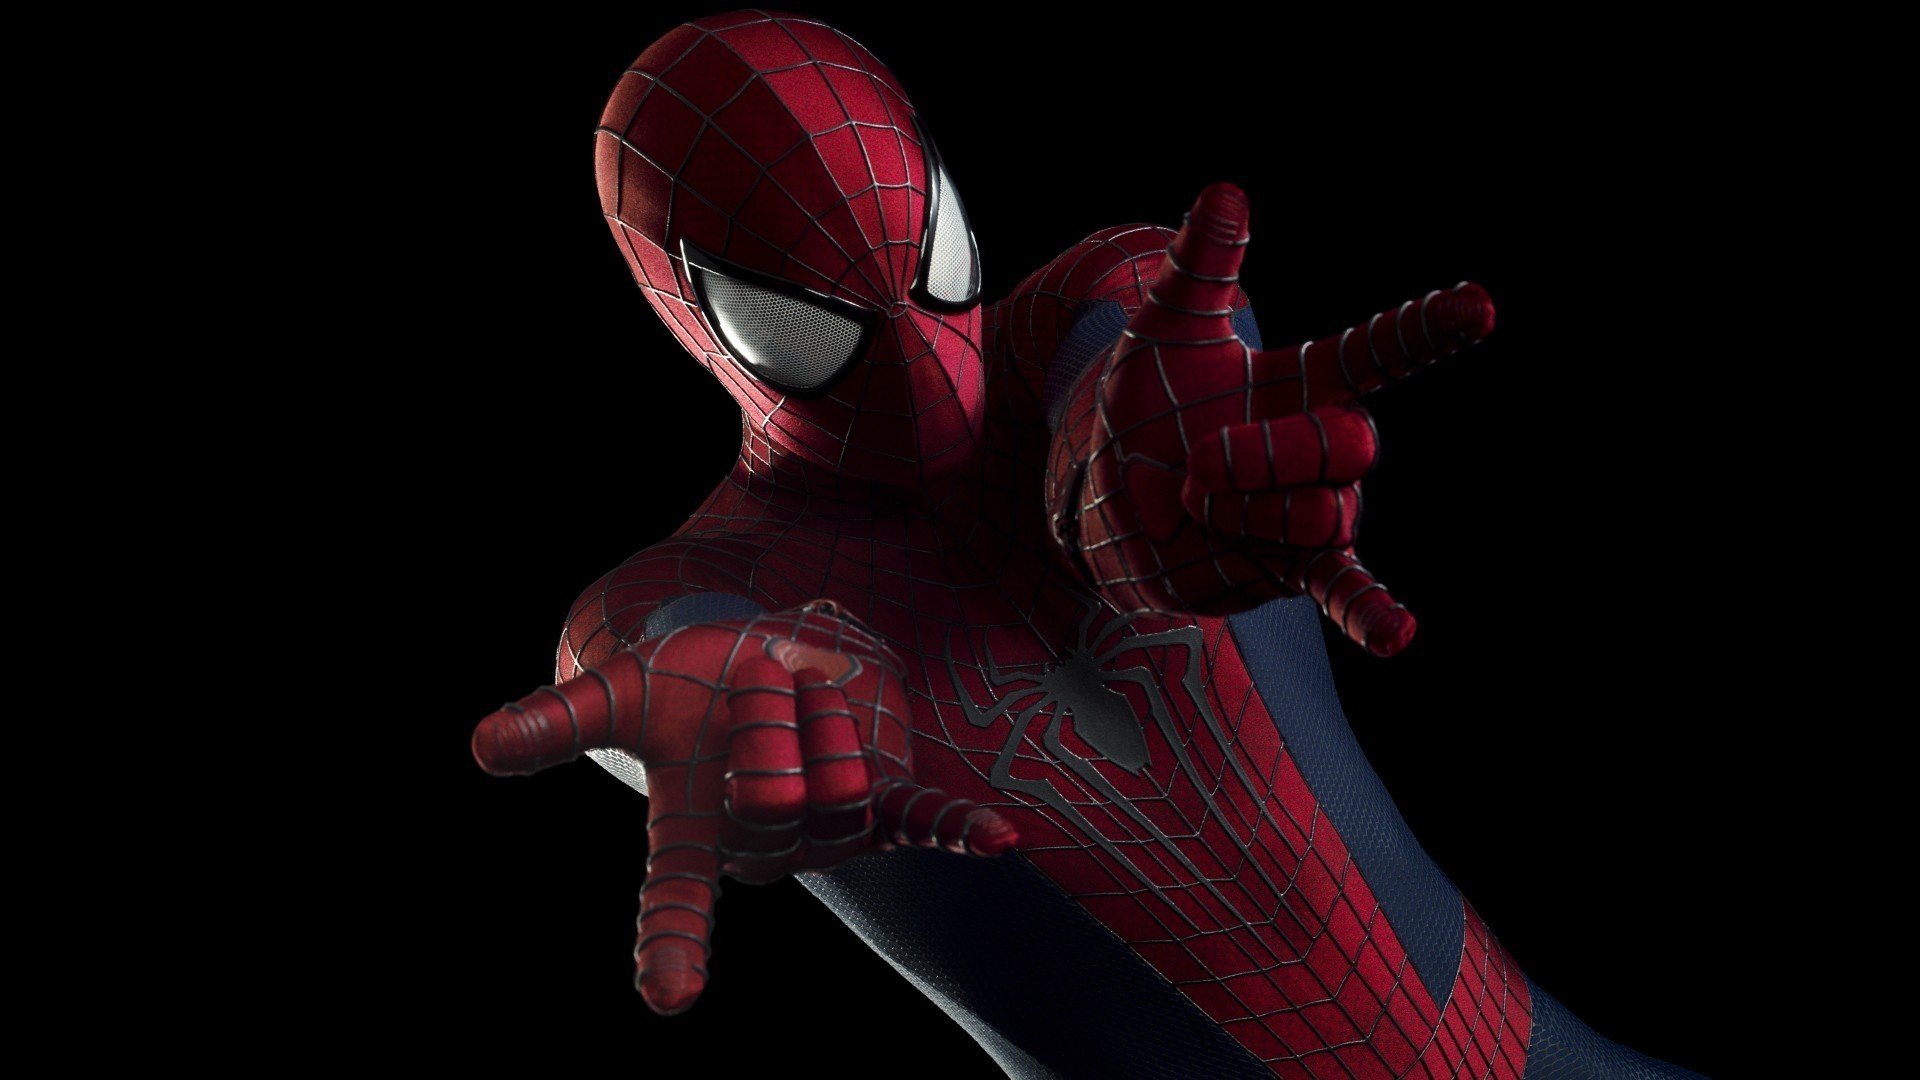 Awesome The Amazing Spider-Man 2 free background ID:102242 for hd 1920x1080 desktop